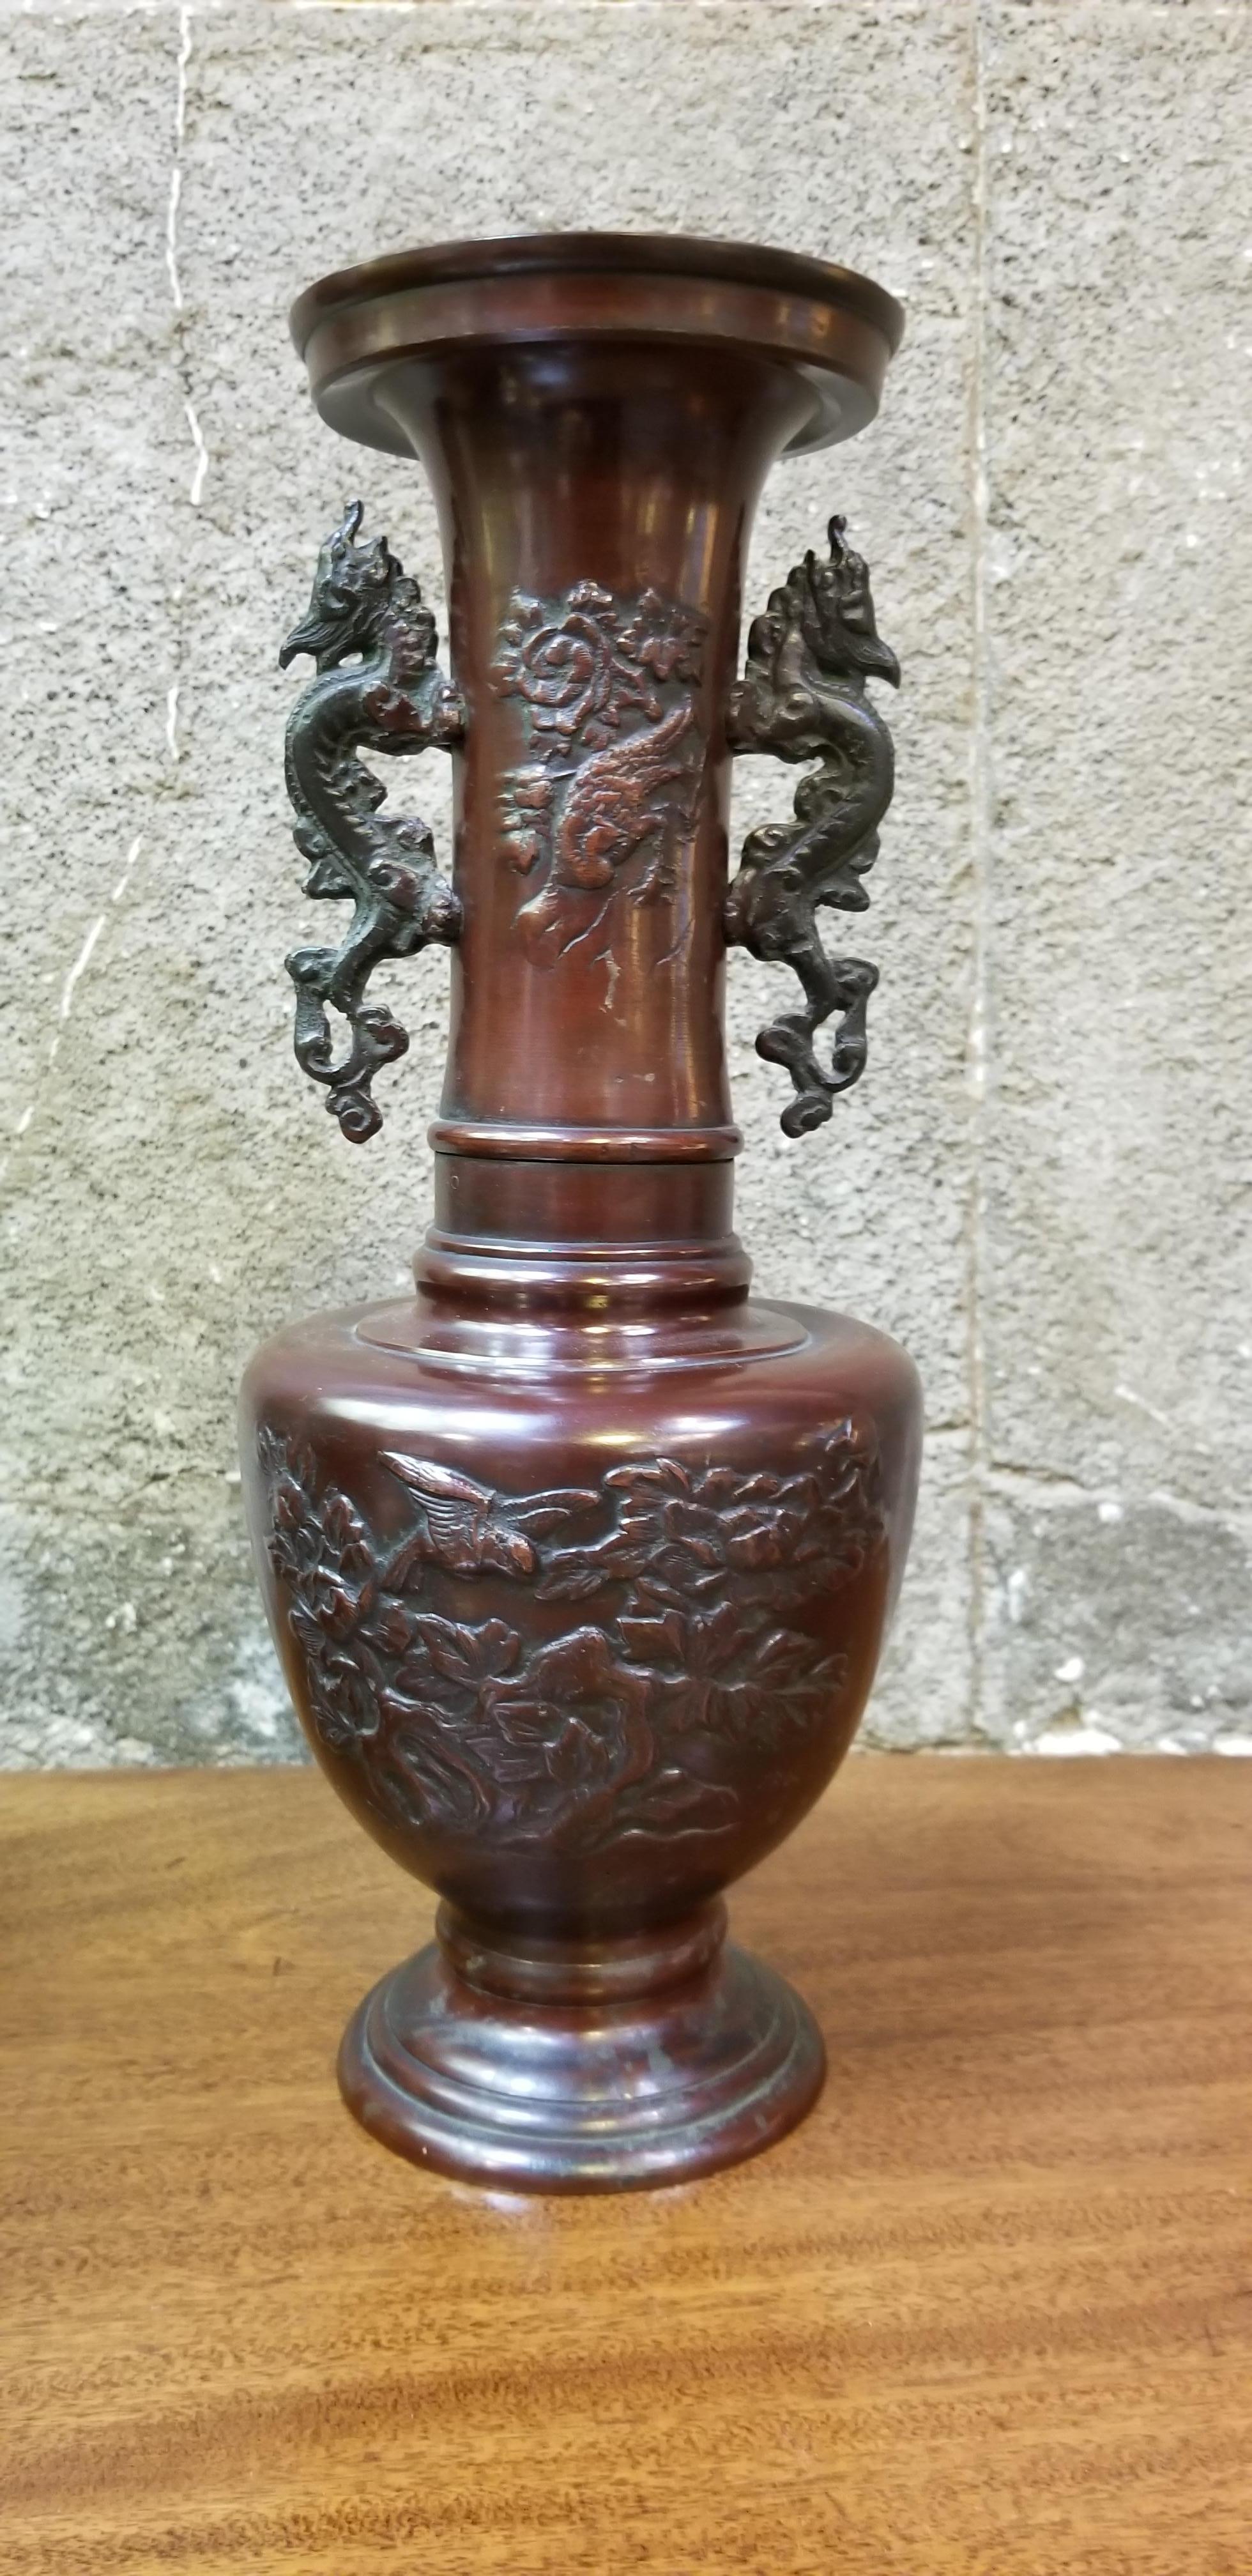 Japanese Bronze Vase with Dragon, Bird and Flora Motif In Good Condition For Sale In Fulton, CA